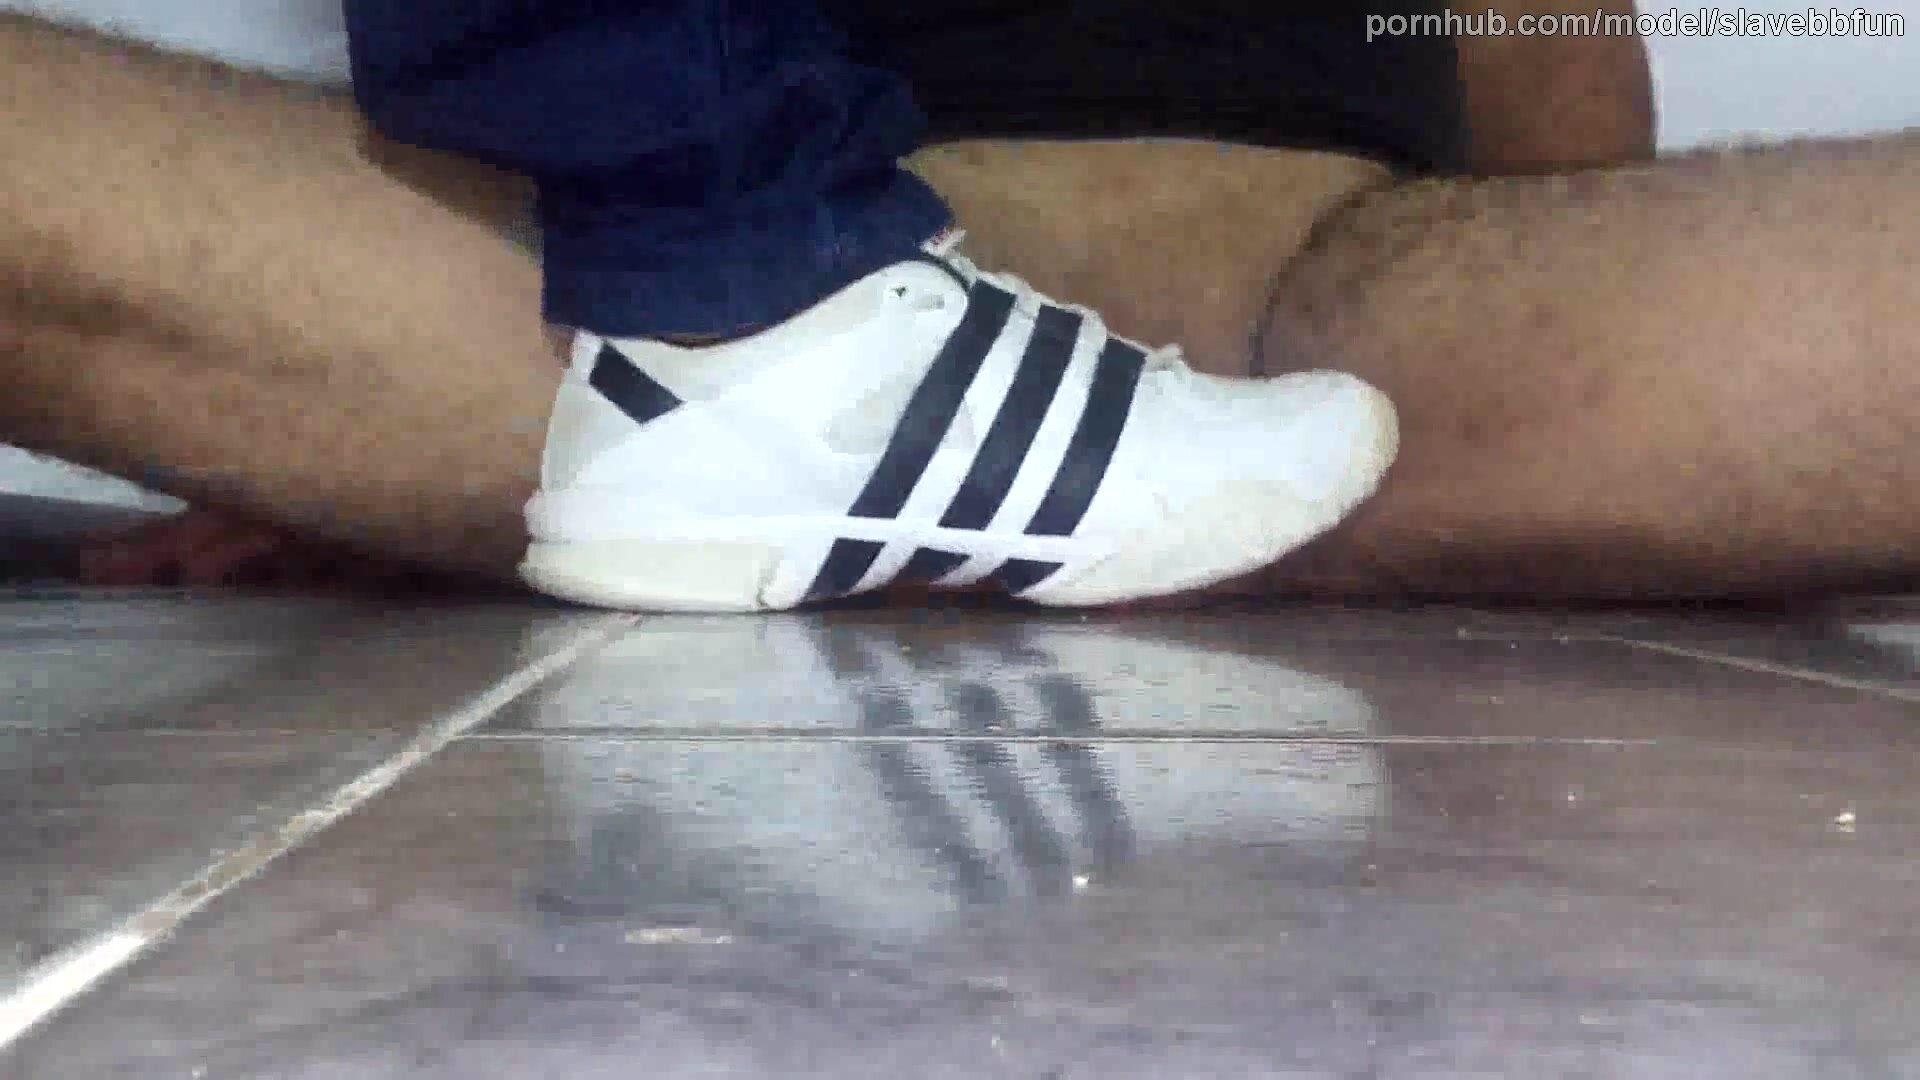 CBT Stomp Dick by Adidas Sneaker